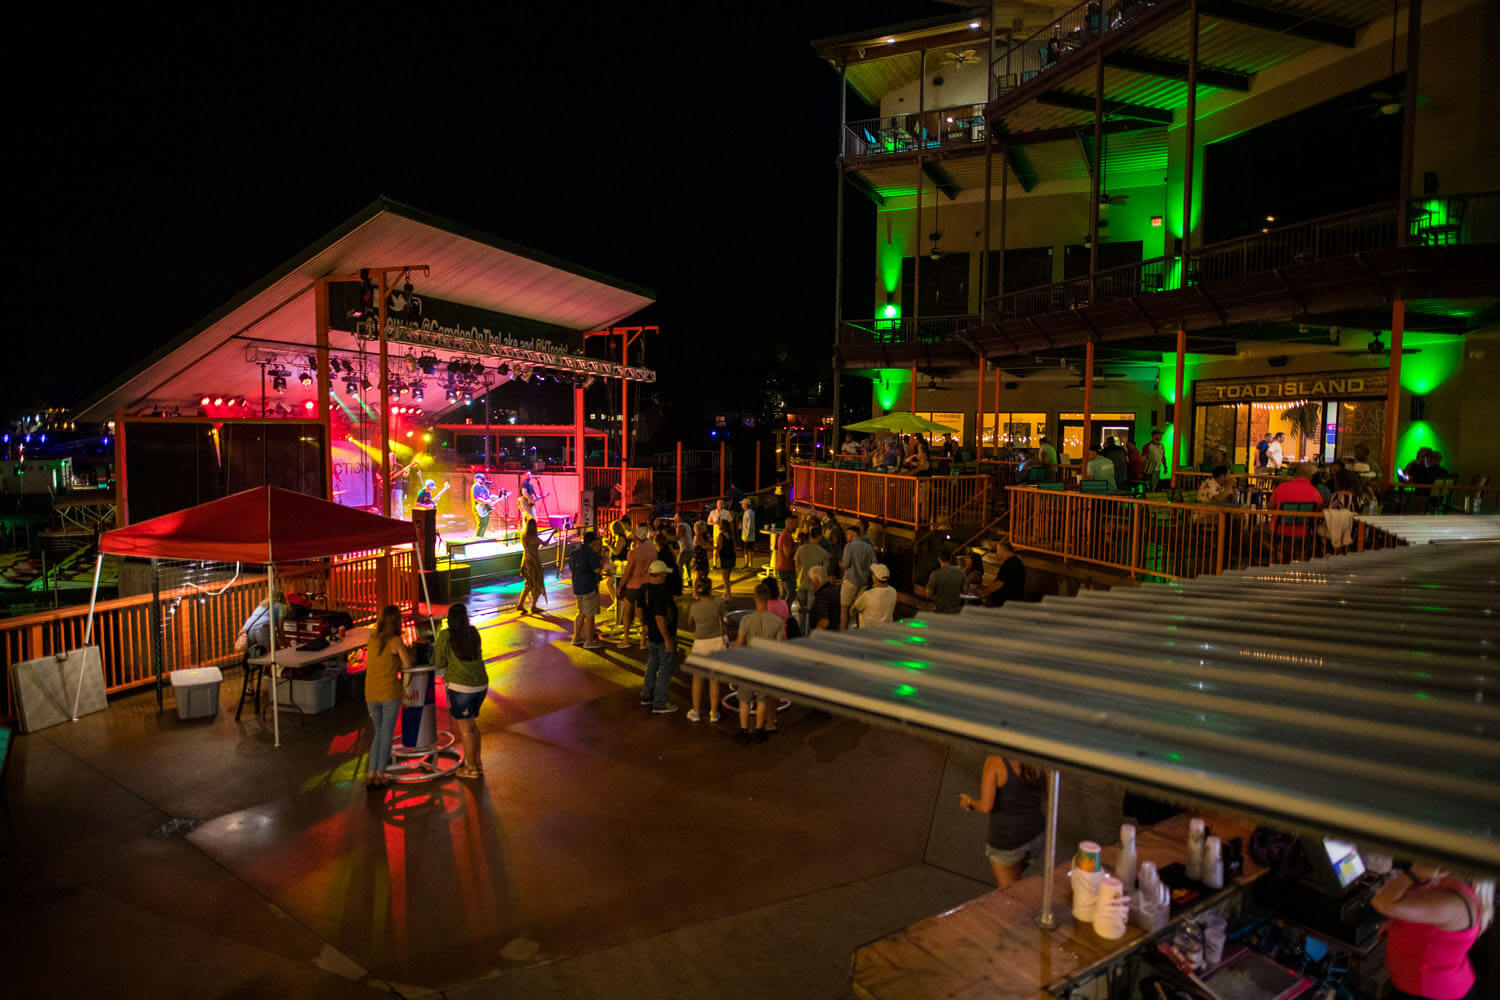 Live music on the stage at Toad Island Camden on the Lake Resort Lake of the Ozarks